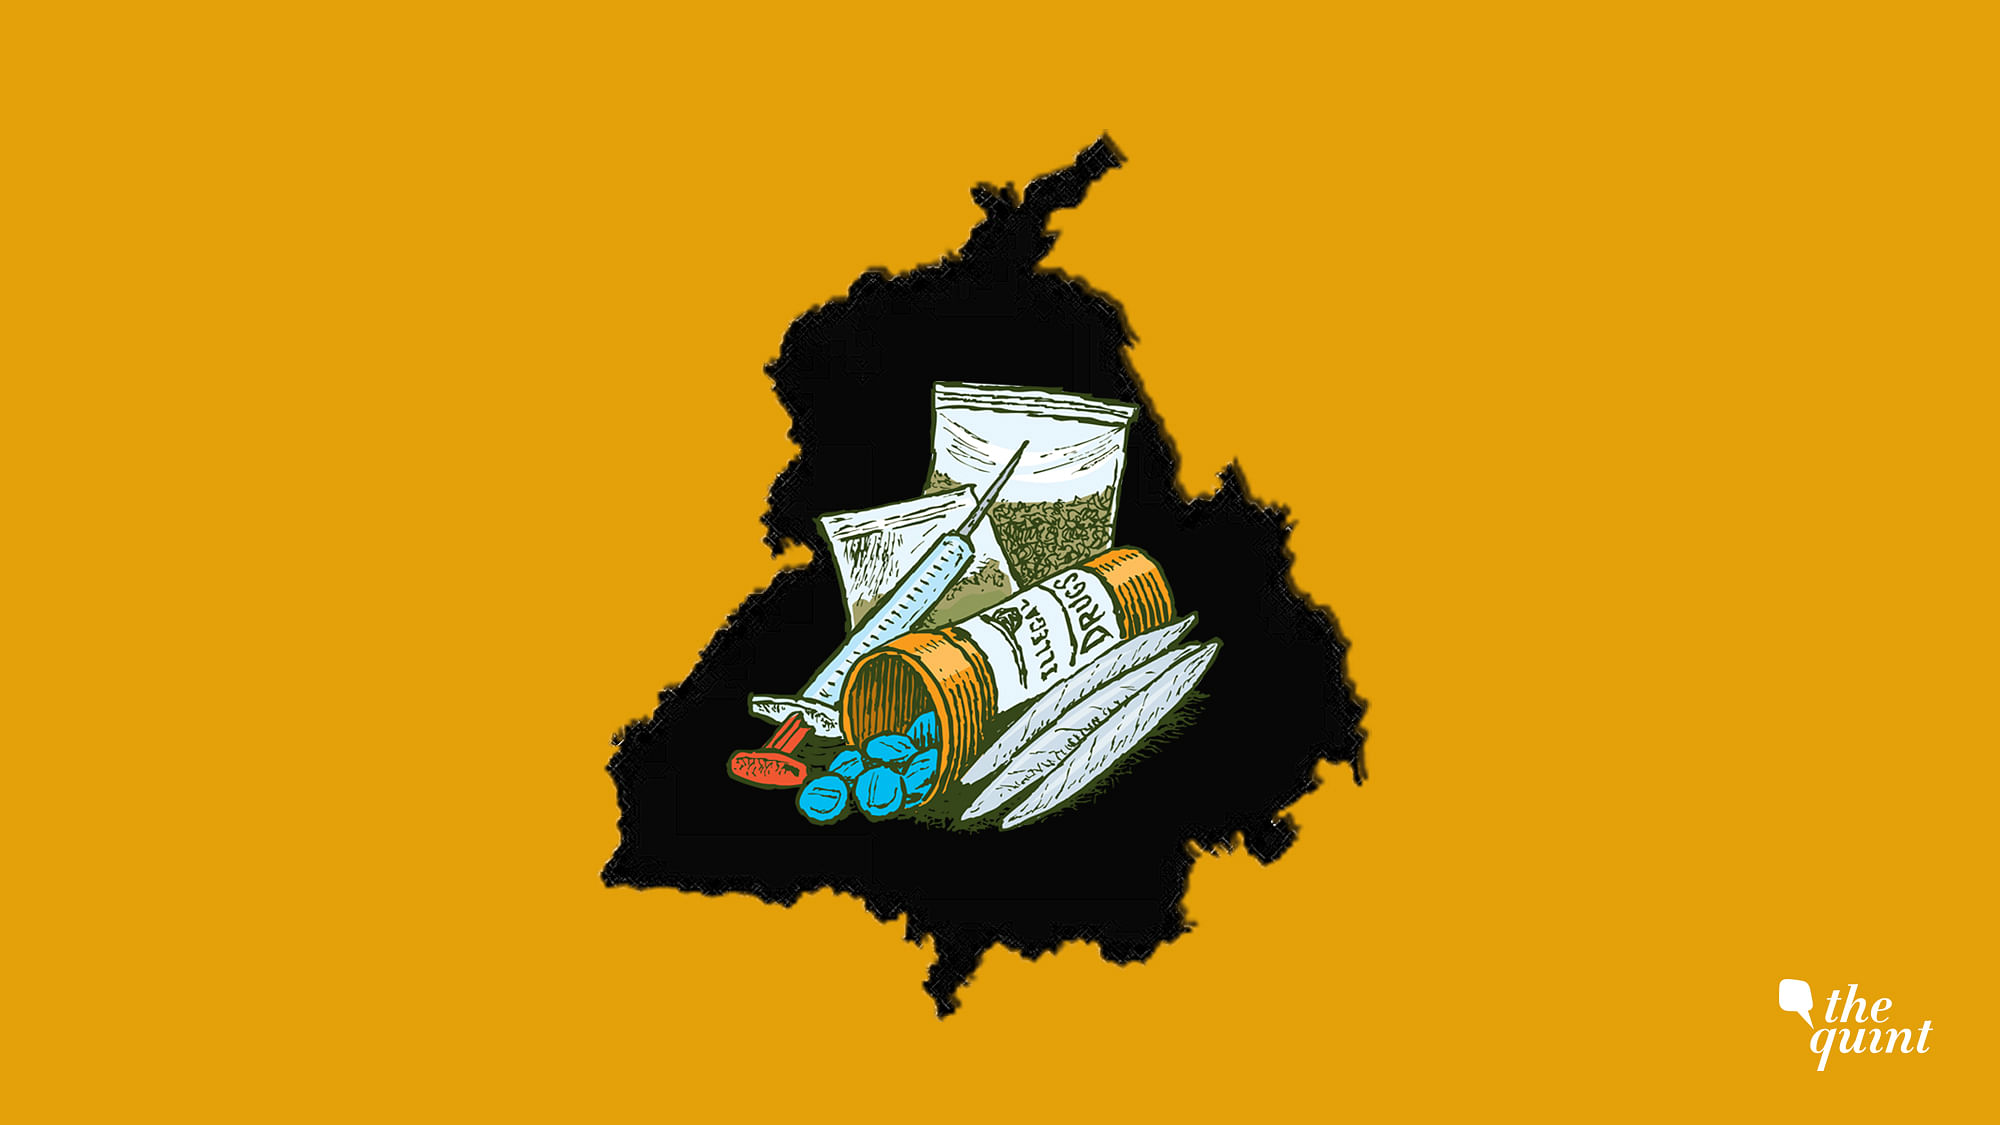 Map of Punjab and illustration of drugs/syringe, used for representational purposes.